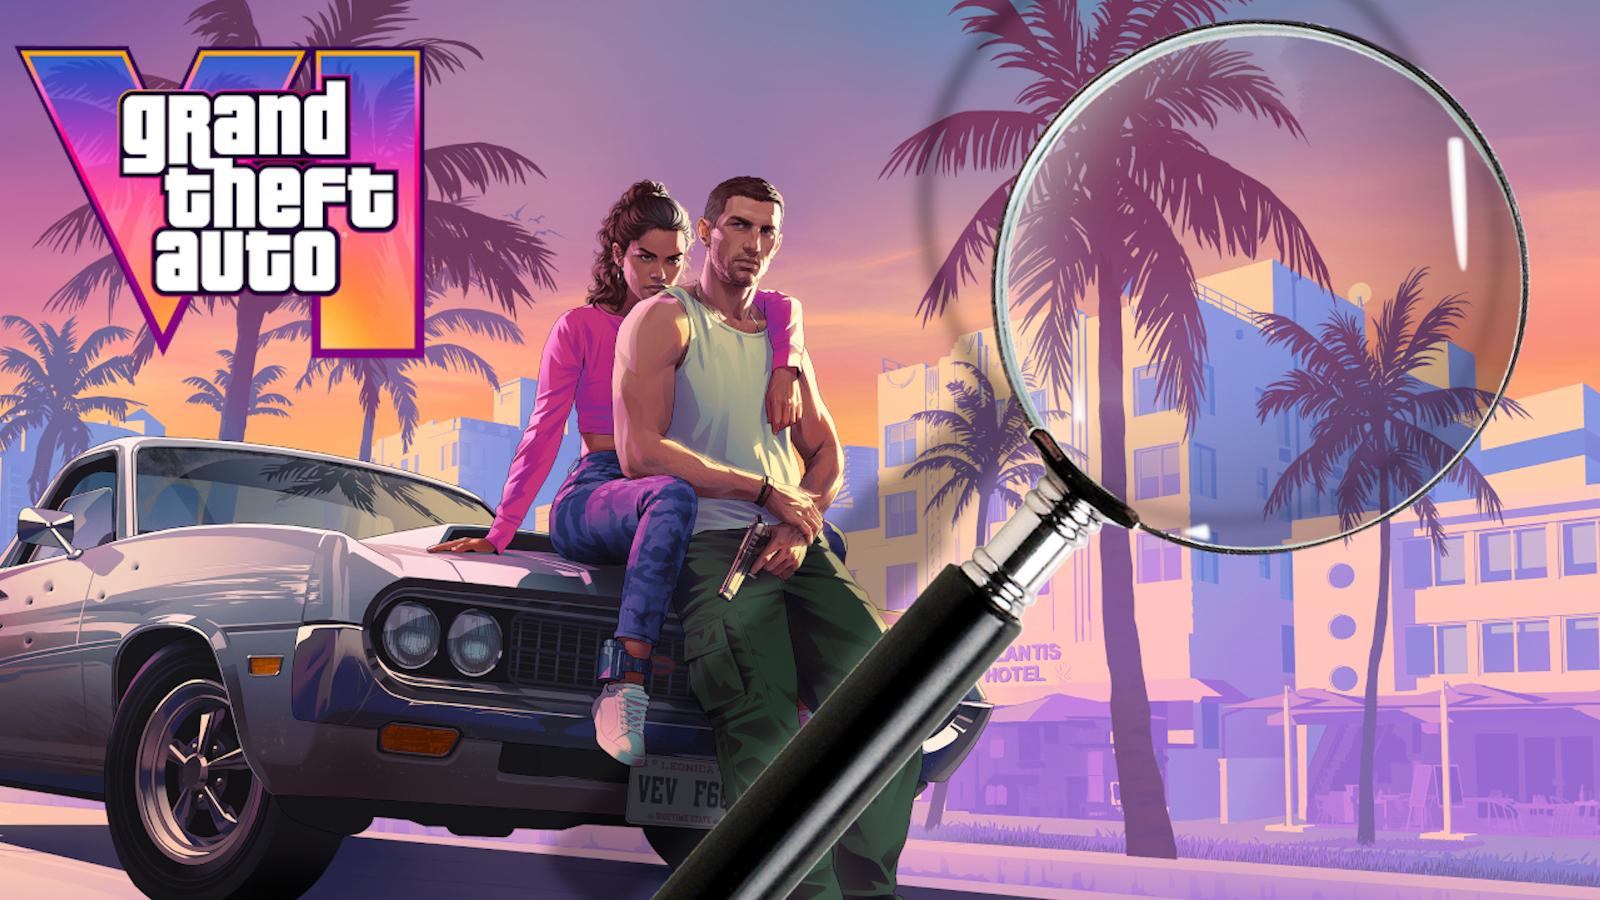 GTA 6 fans may have discovered the Vice City map hidden in official artwork  - Dexerto